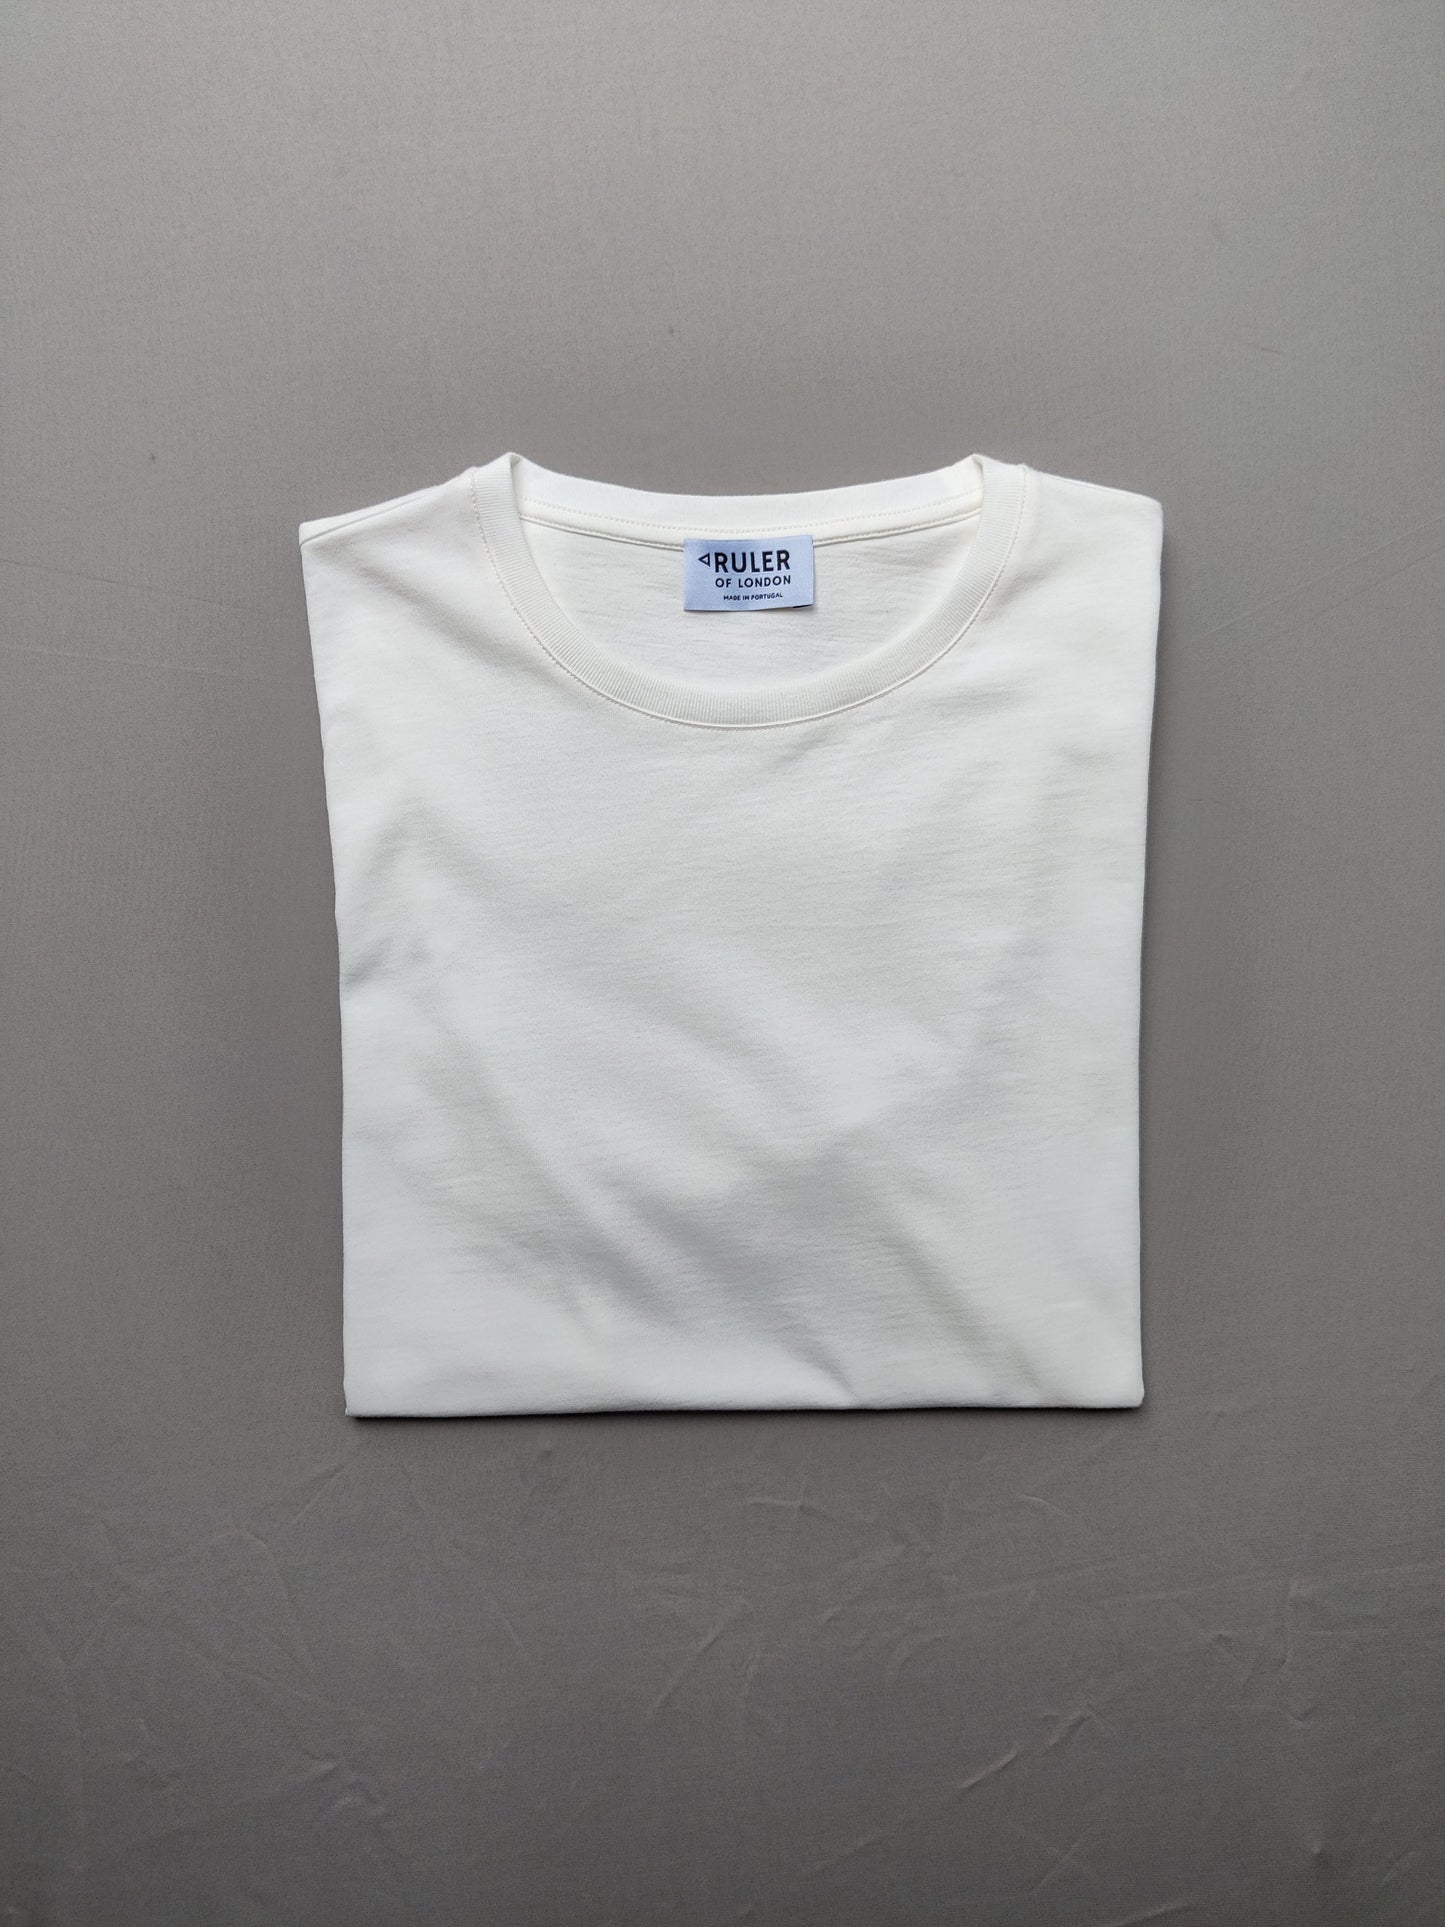 The Classic T-Shirt - Multipack of 3